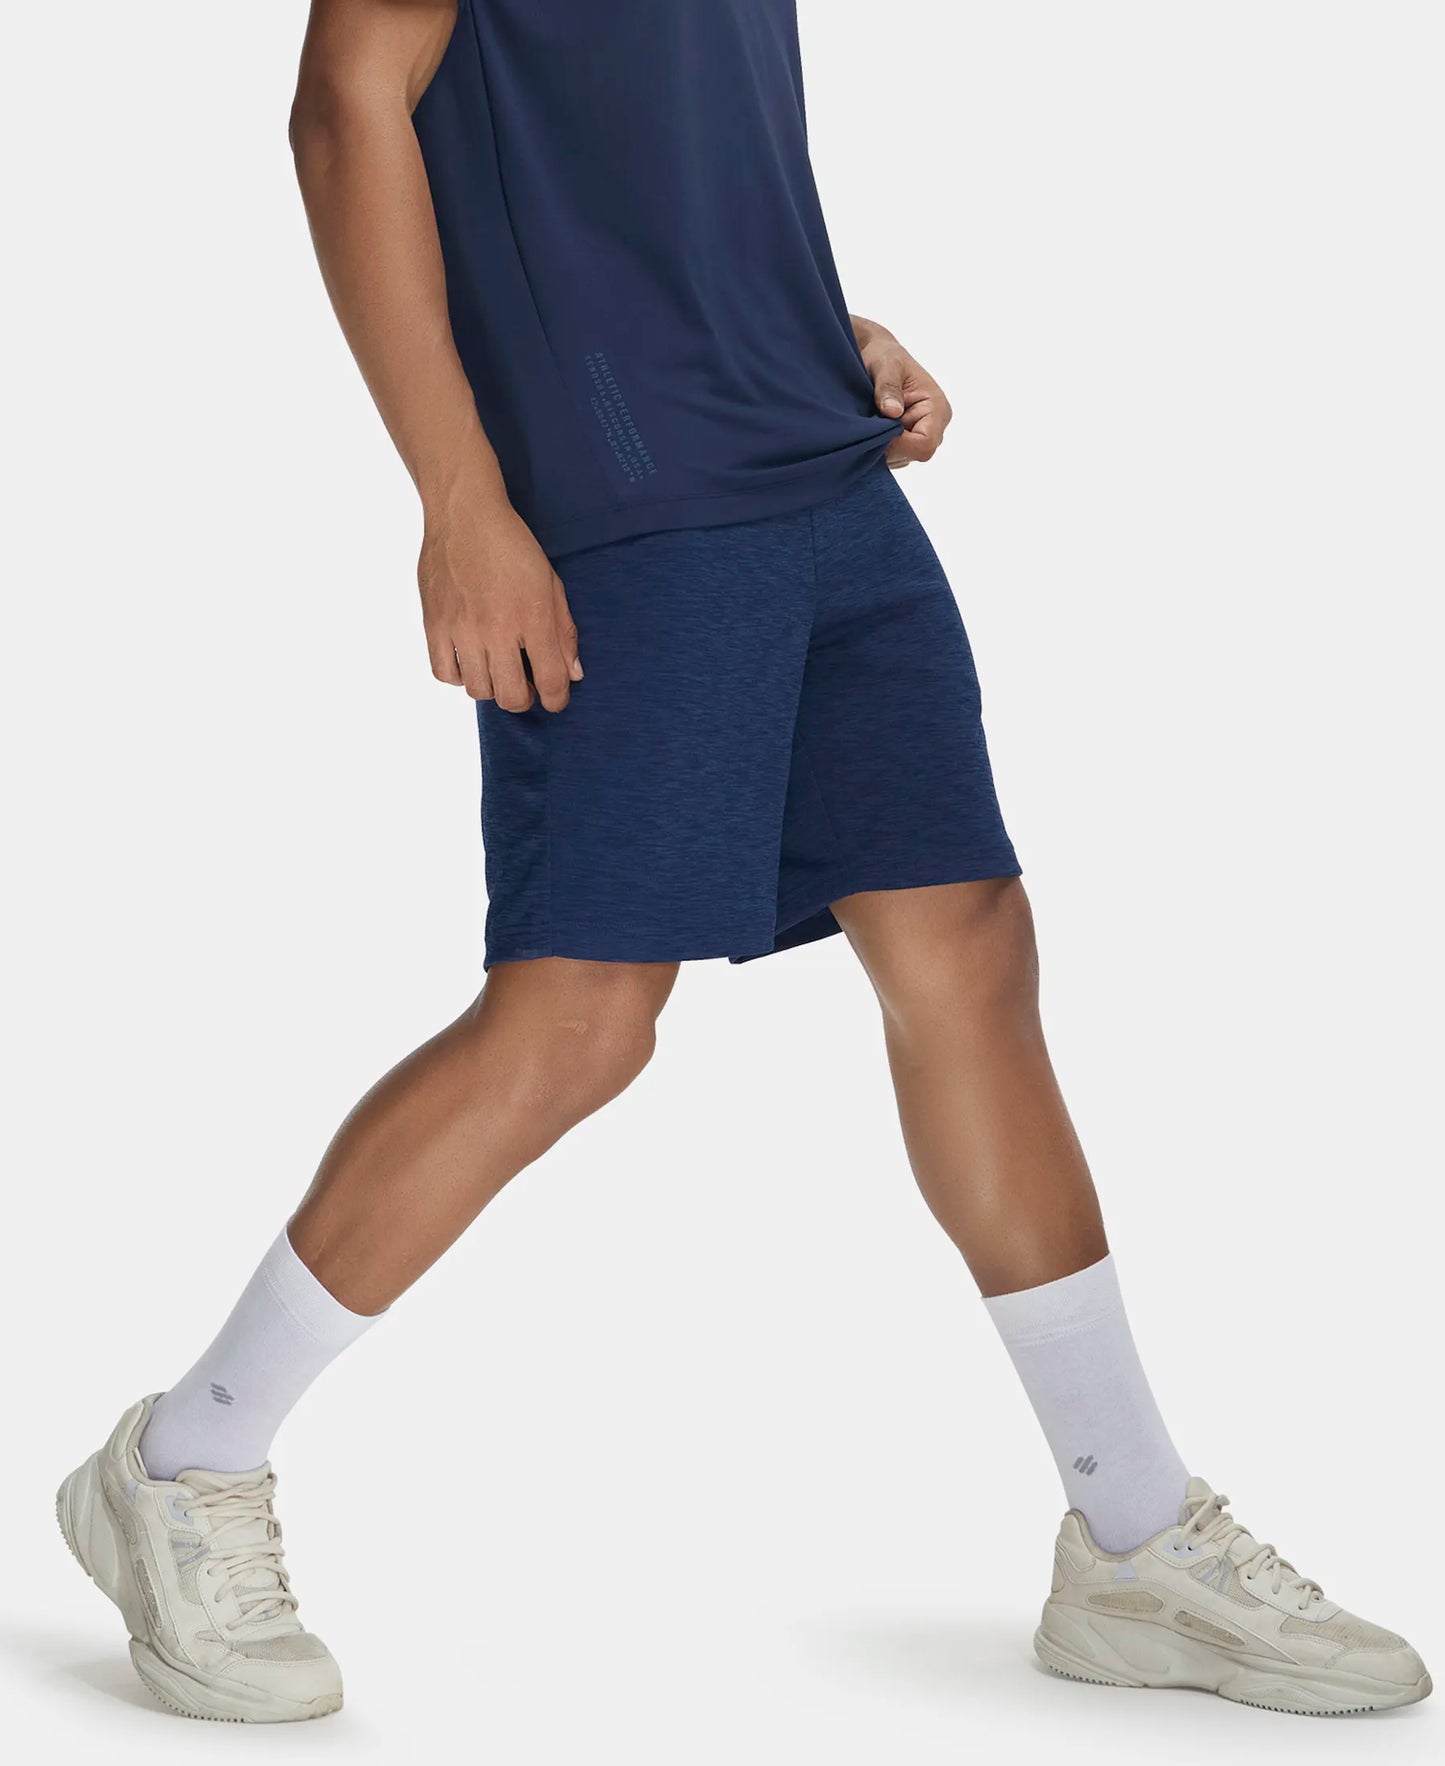 Lightweight Microfiber Shorts with Zipper Pockets and StayFresh Treatment - Navy-5